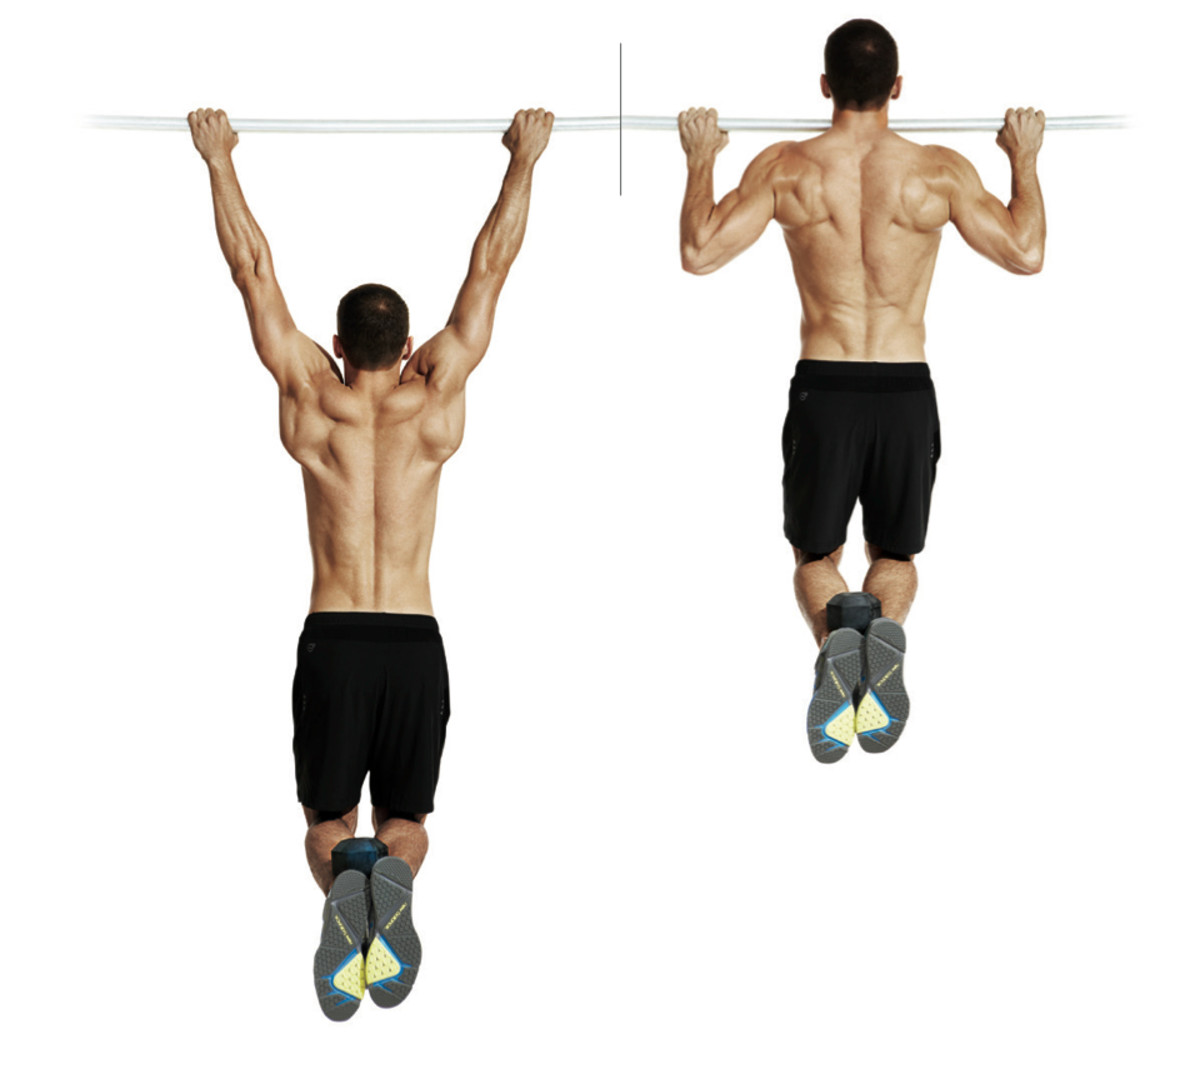 The 13 Best Upper Back Exercises For Strength, Size, and Posture